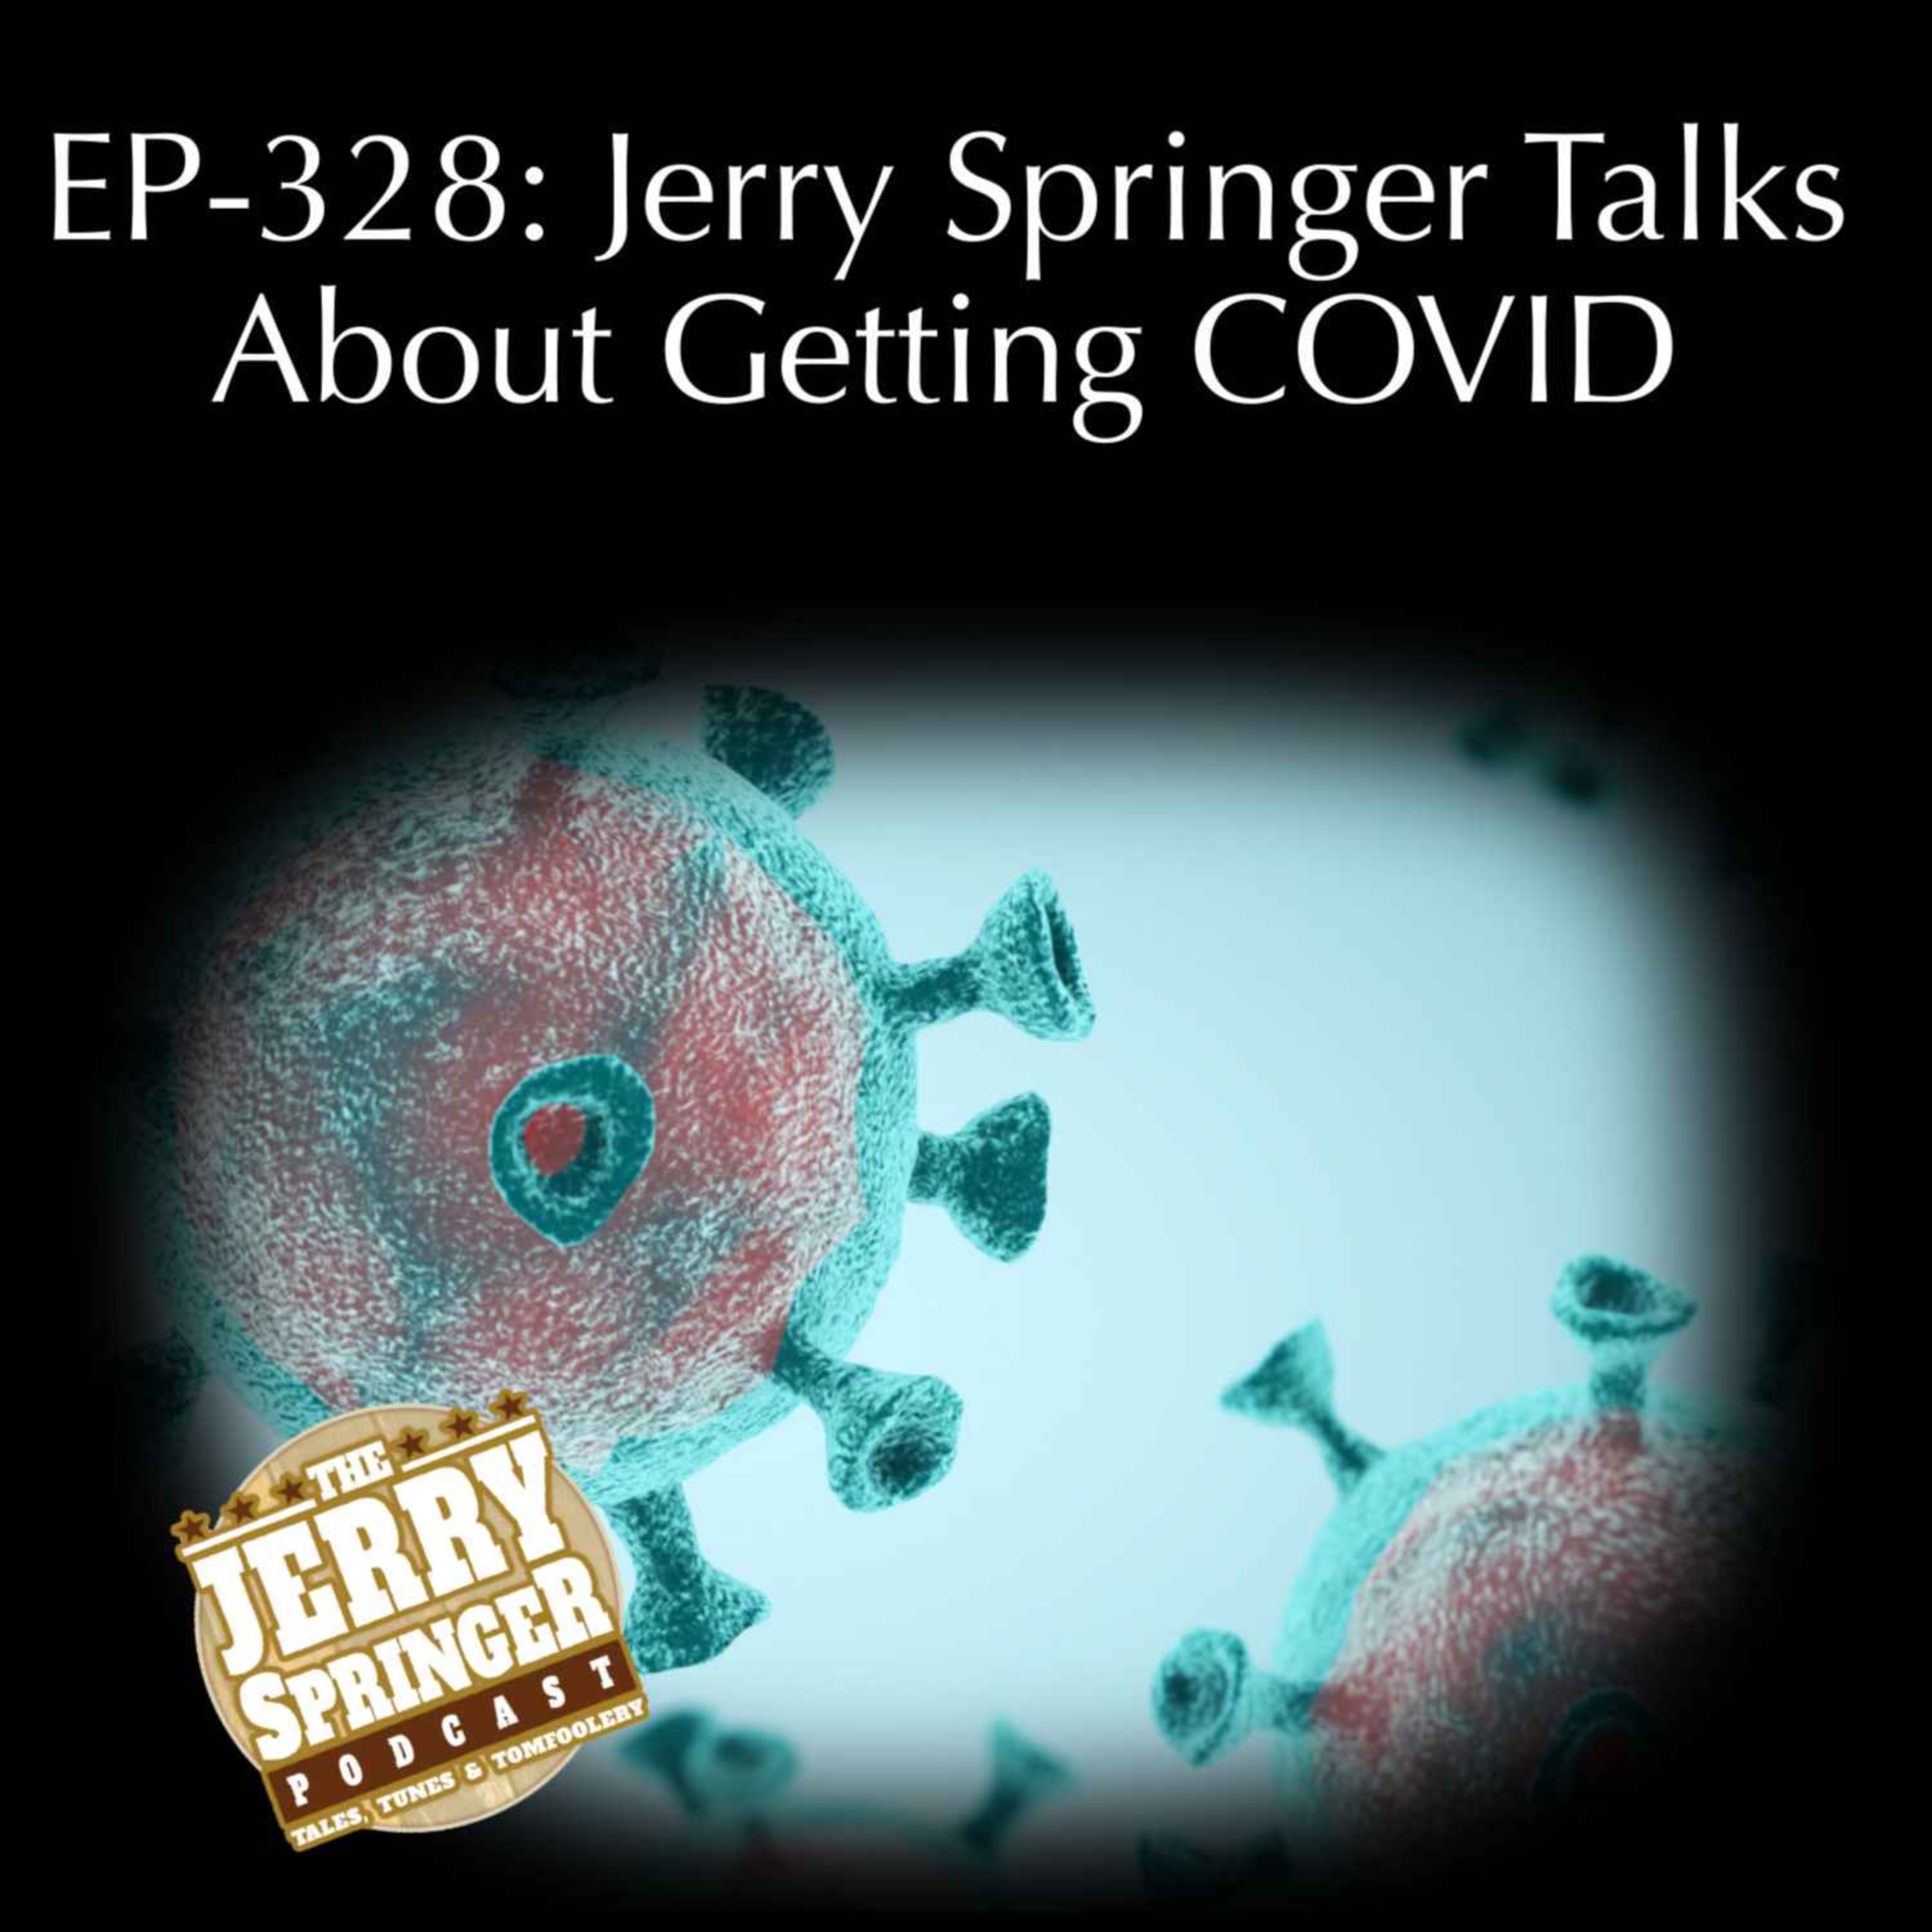 Jerry Springer Talks About Getting COVID: EP-328